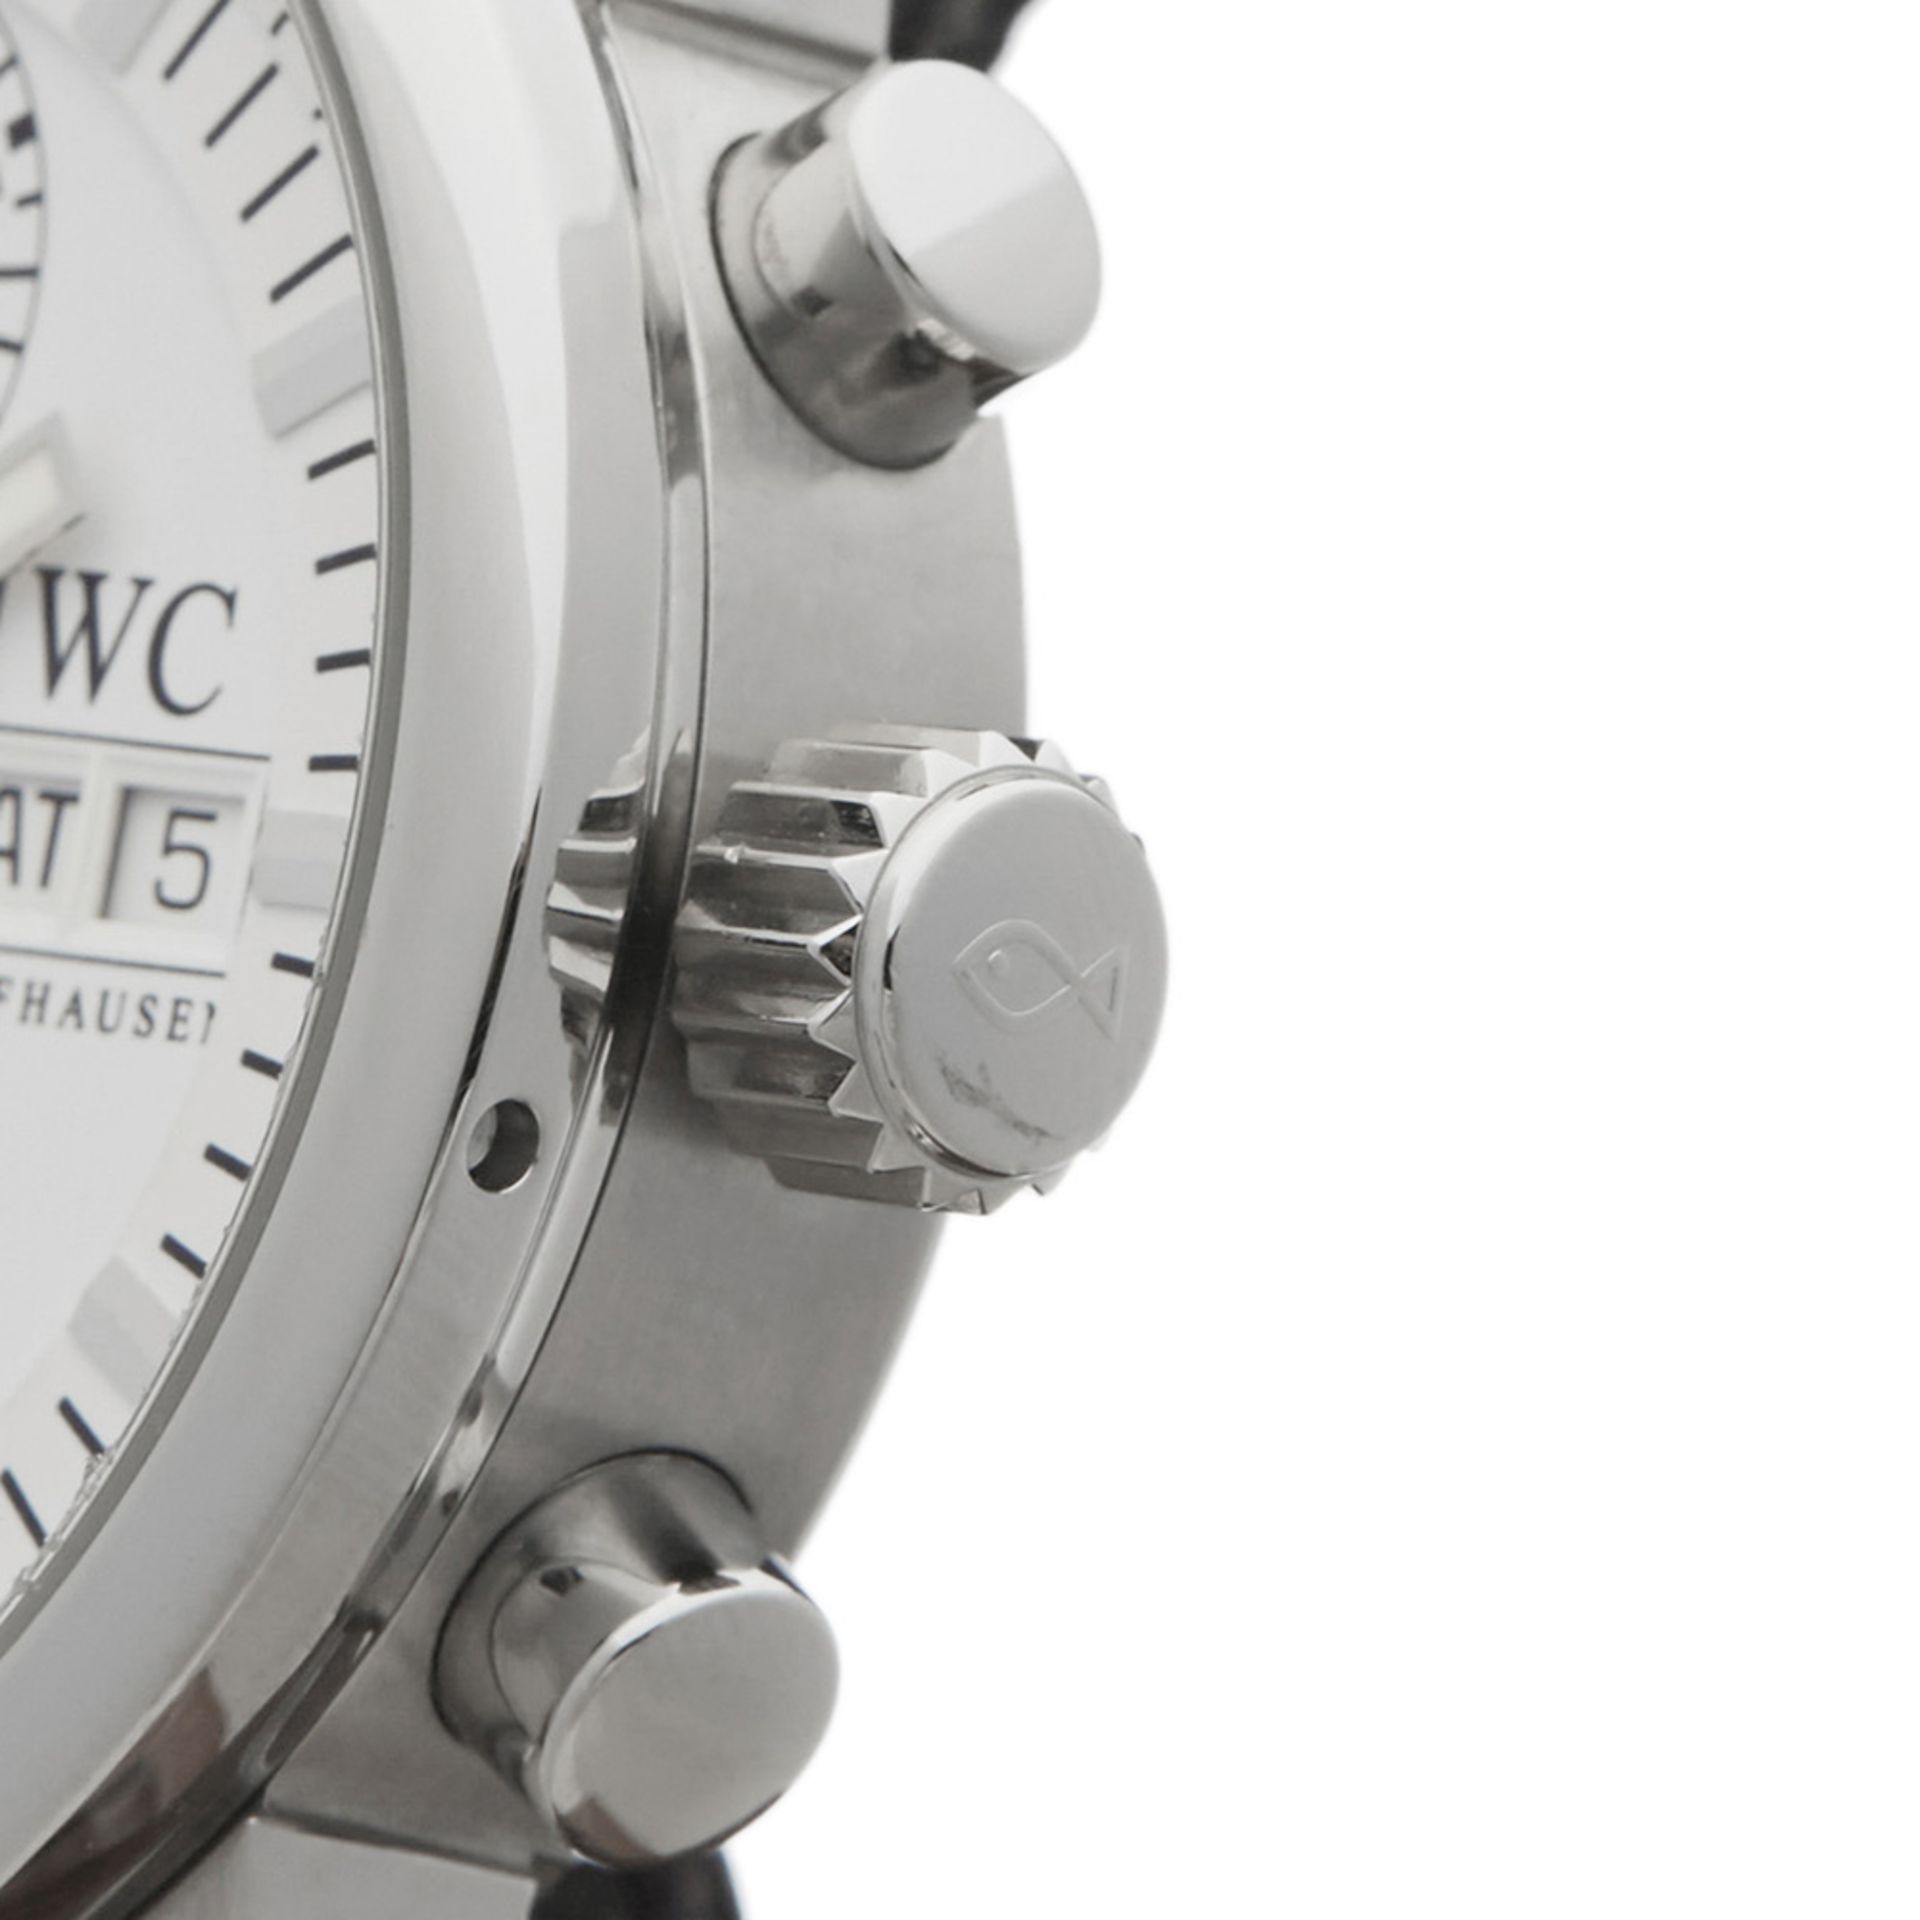 IWC, GST Rattrapante 43mm Stainless Steel IW371523 - Image 4 of 9